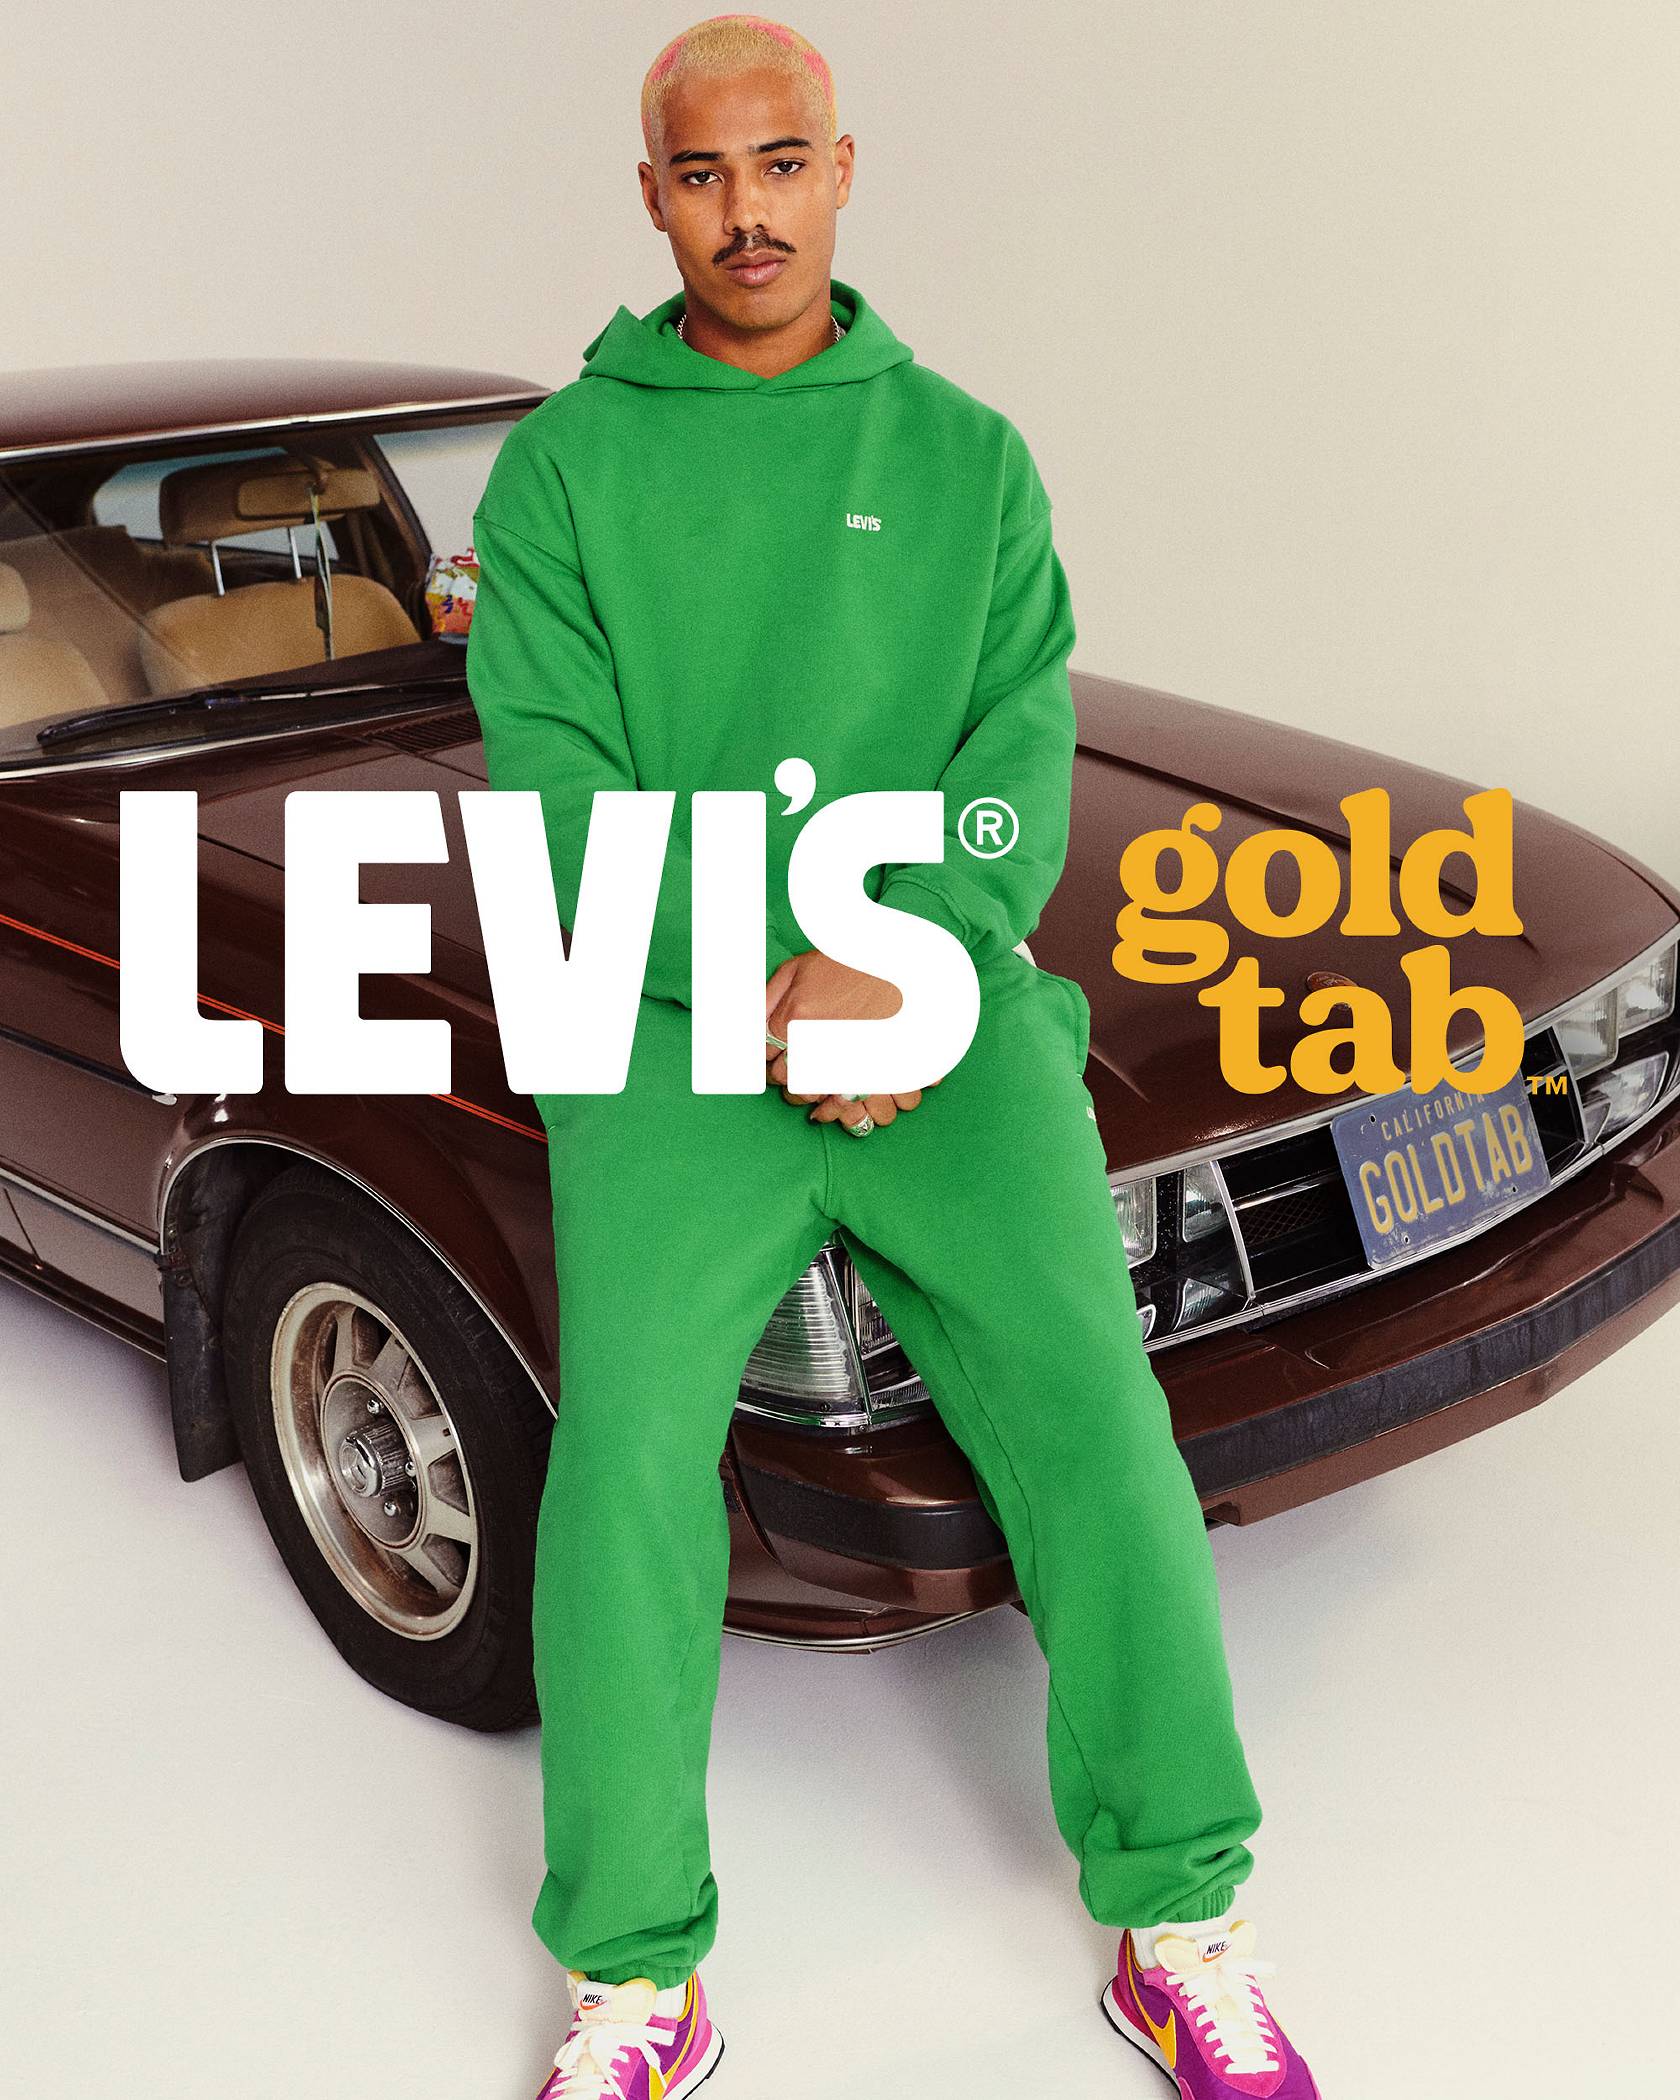 Guy standing leaning on a car with Gold Tab Sweats and a Sweatshirt on in a green color.